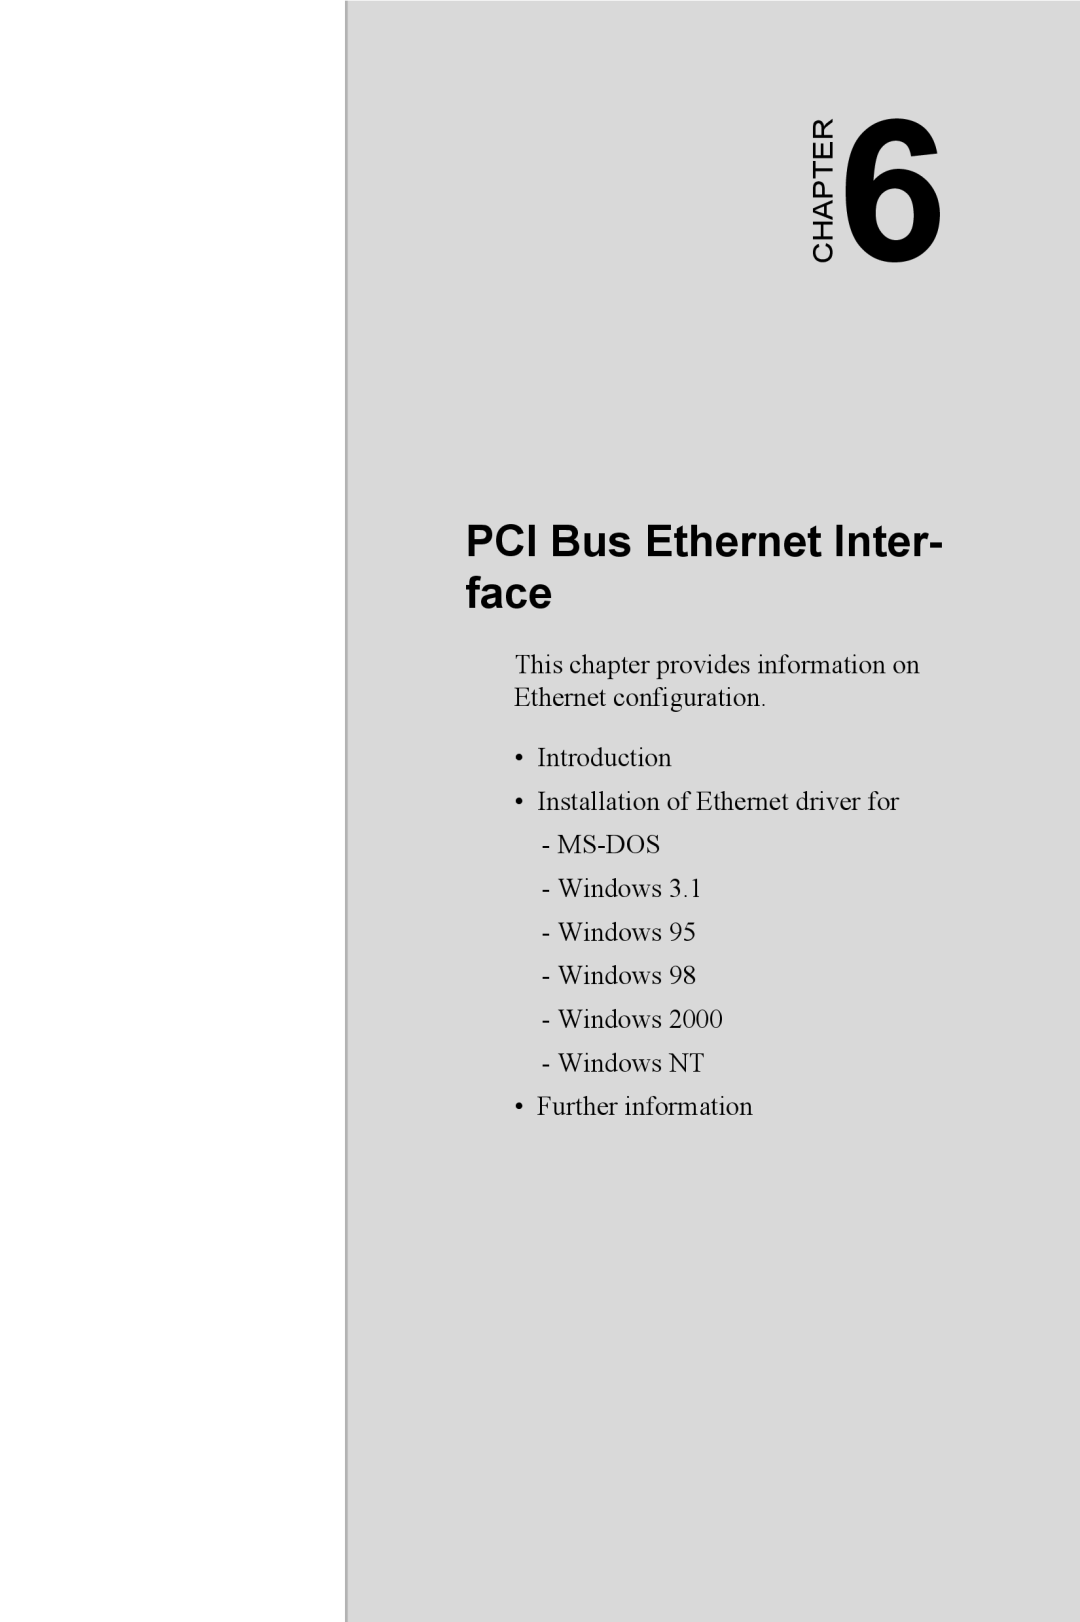 Intel PCM-3370 PCI Bus Ethernet Inter- face, Chapter, This chapter provides information on Ethernet configuration 